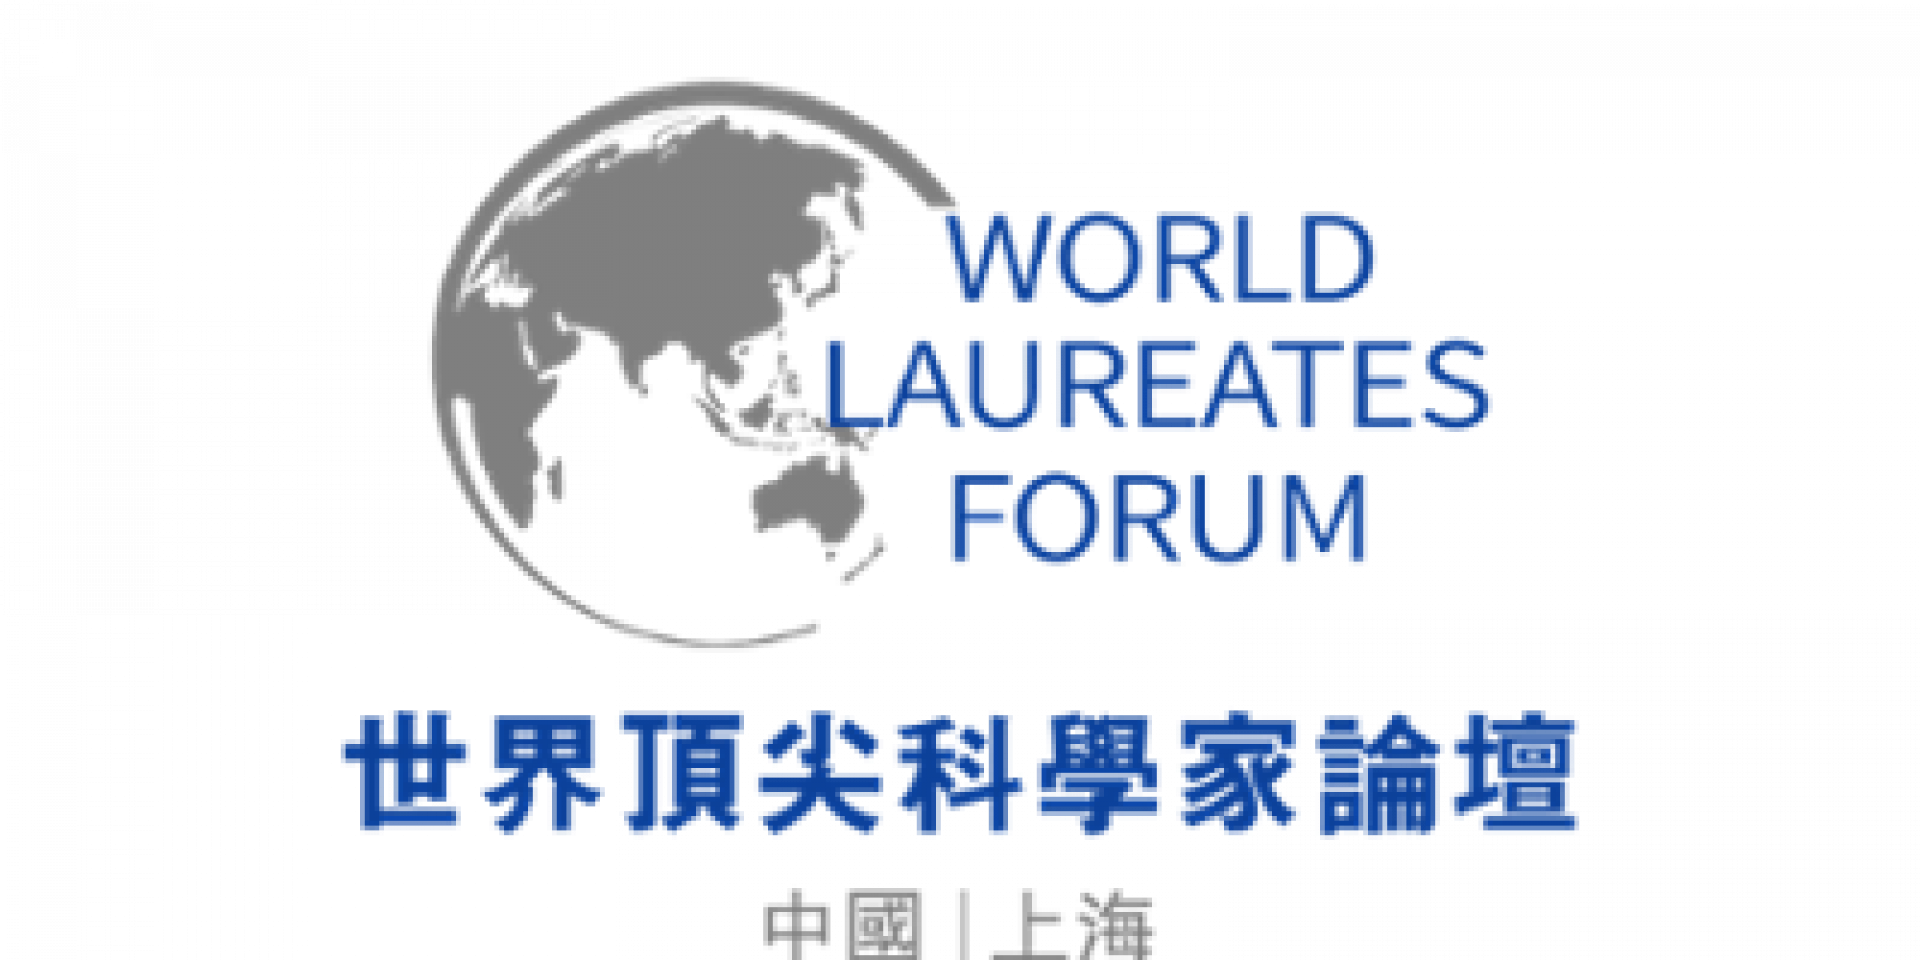 World Laureates Forum: Hurdling the Industry's Toughest Challenges with Glue Up